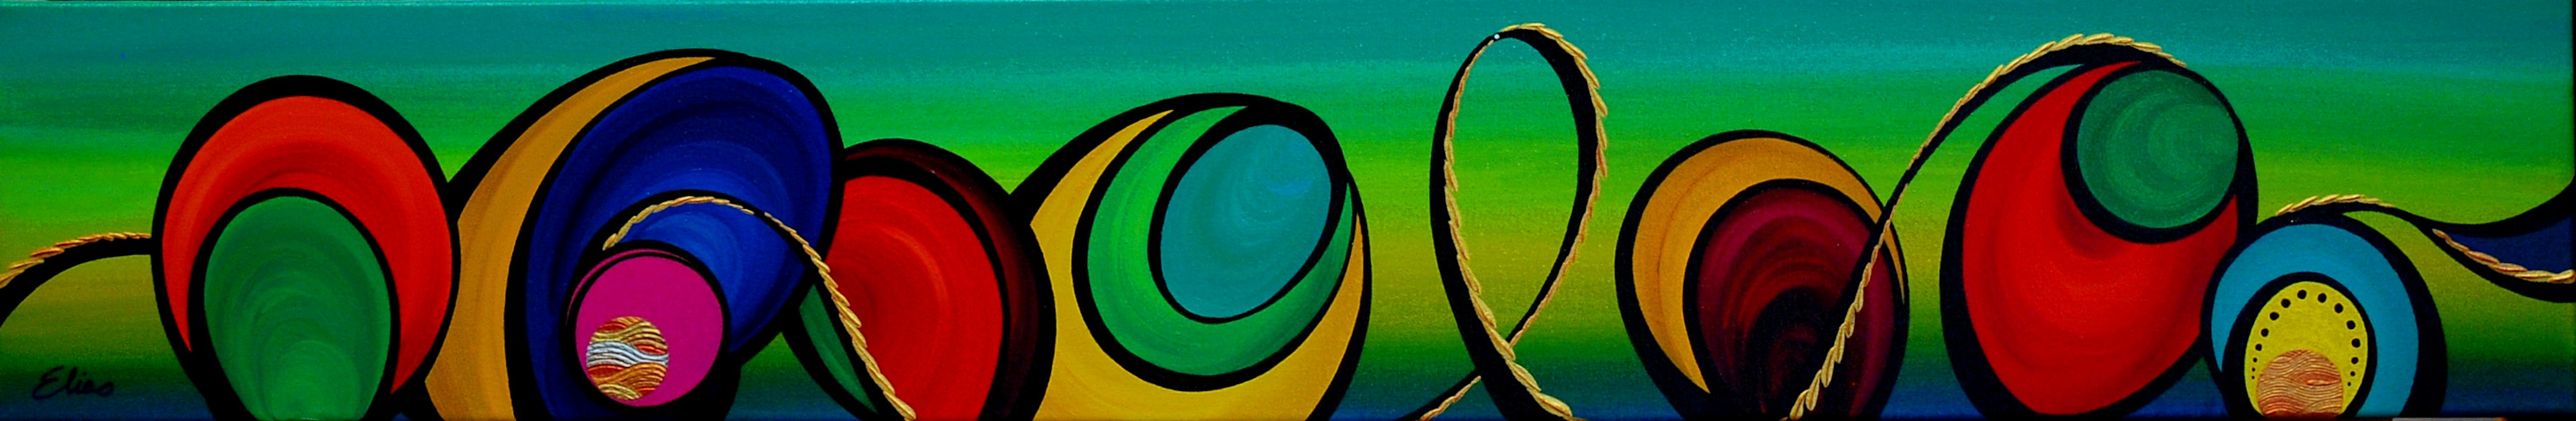 On a roll 1 acrylic on canvas 8x40 shirley elias yjoter